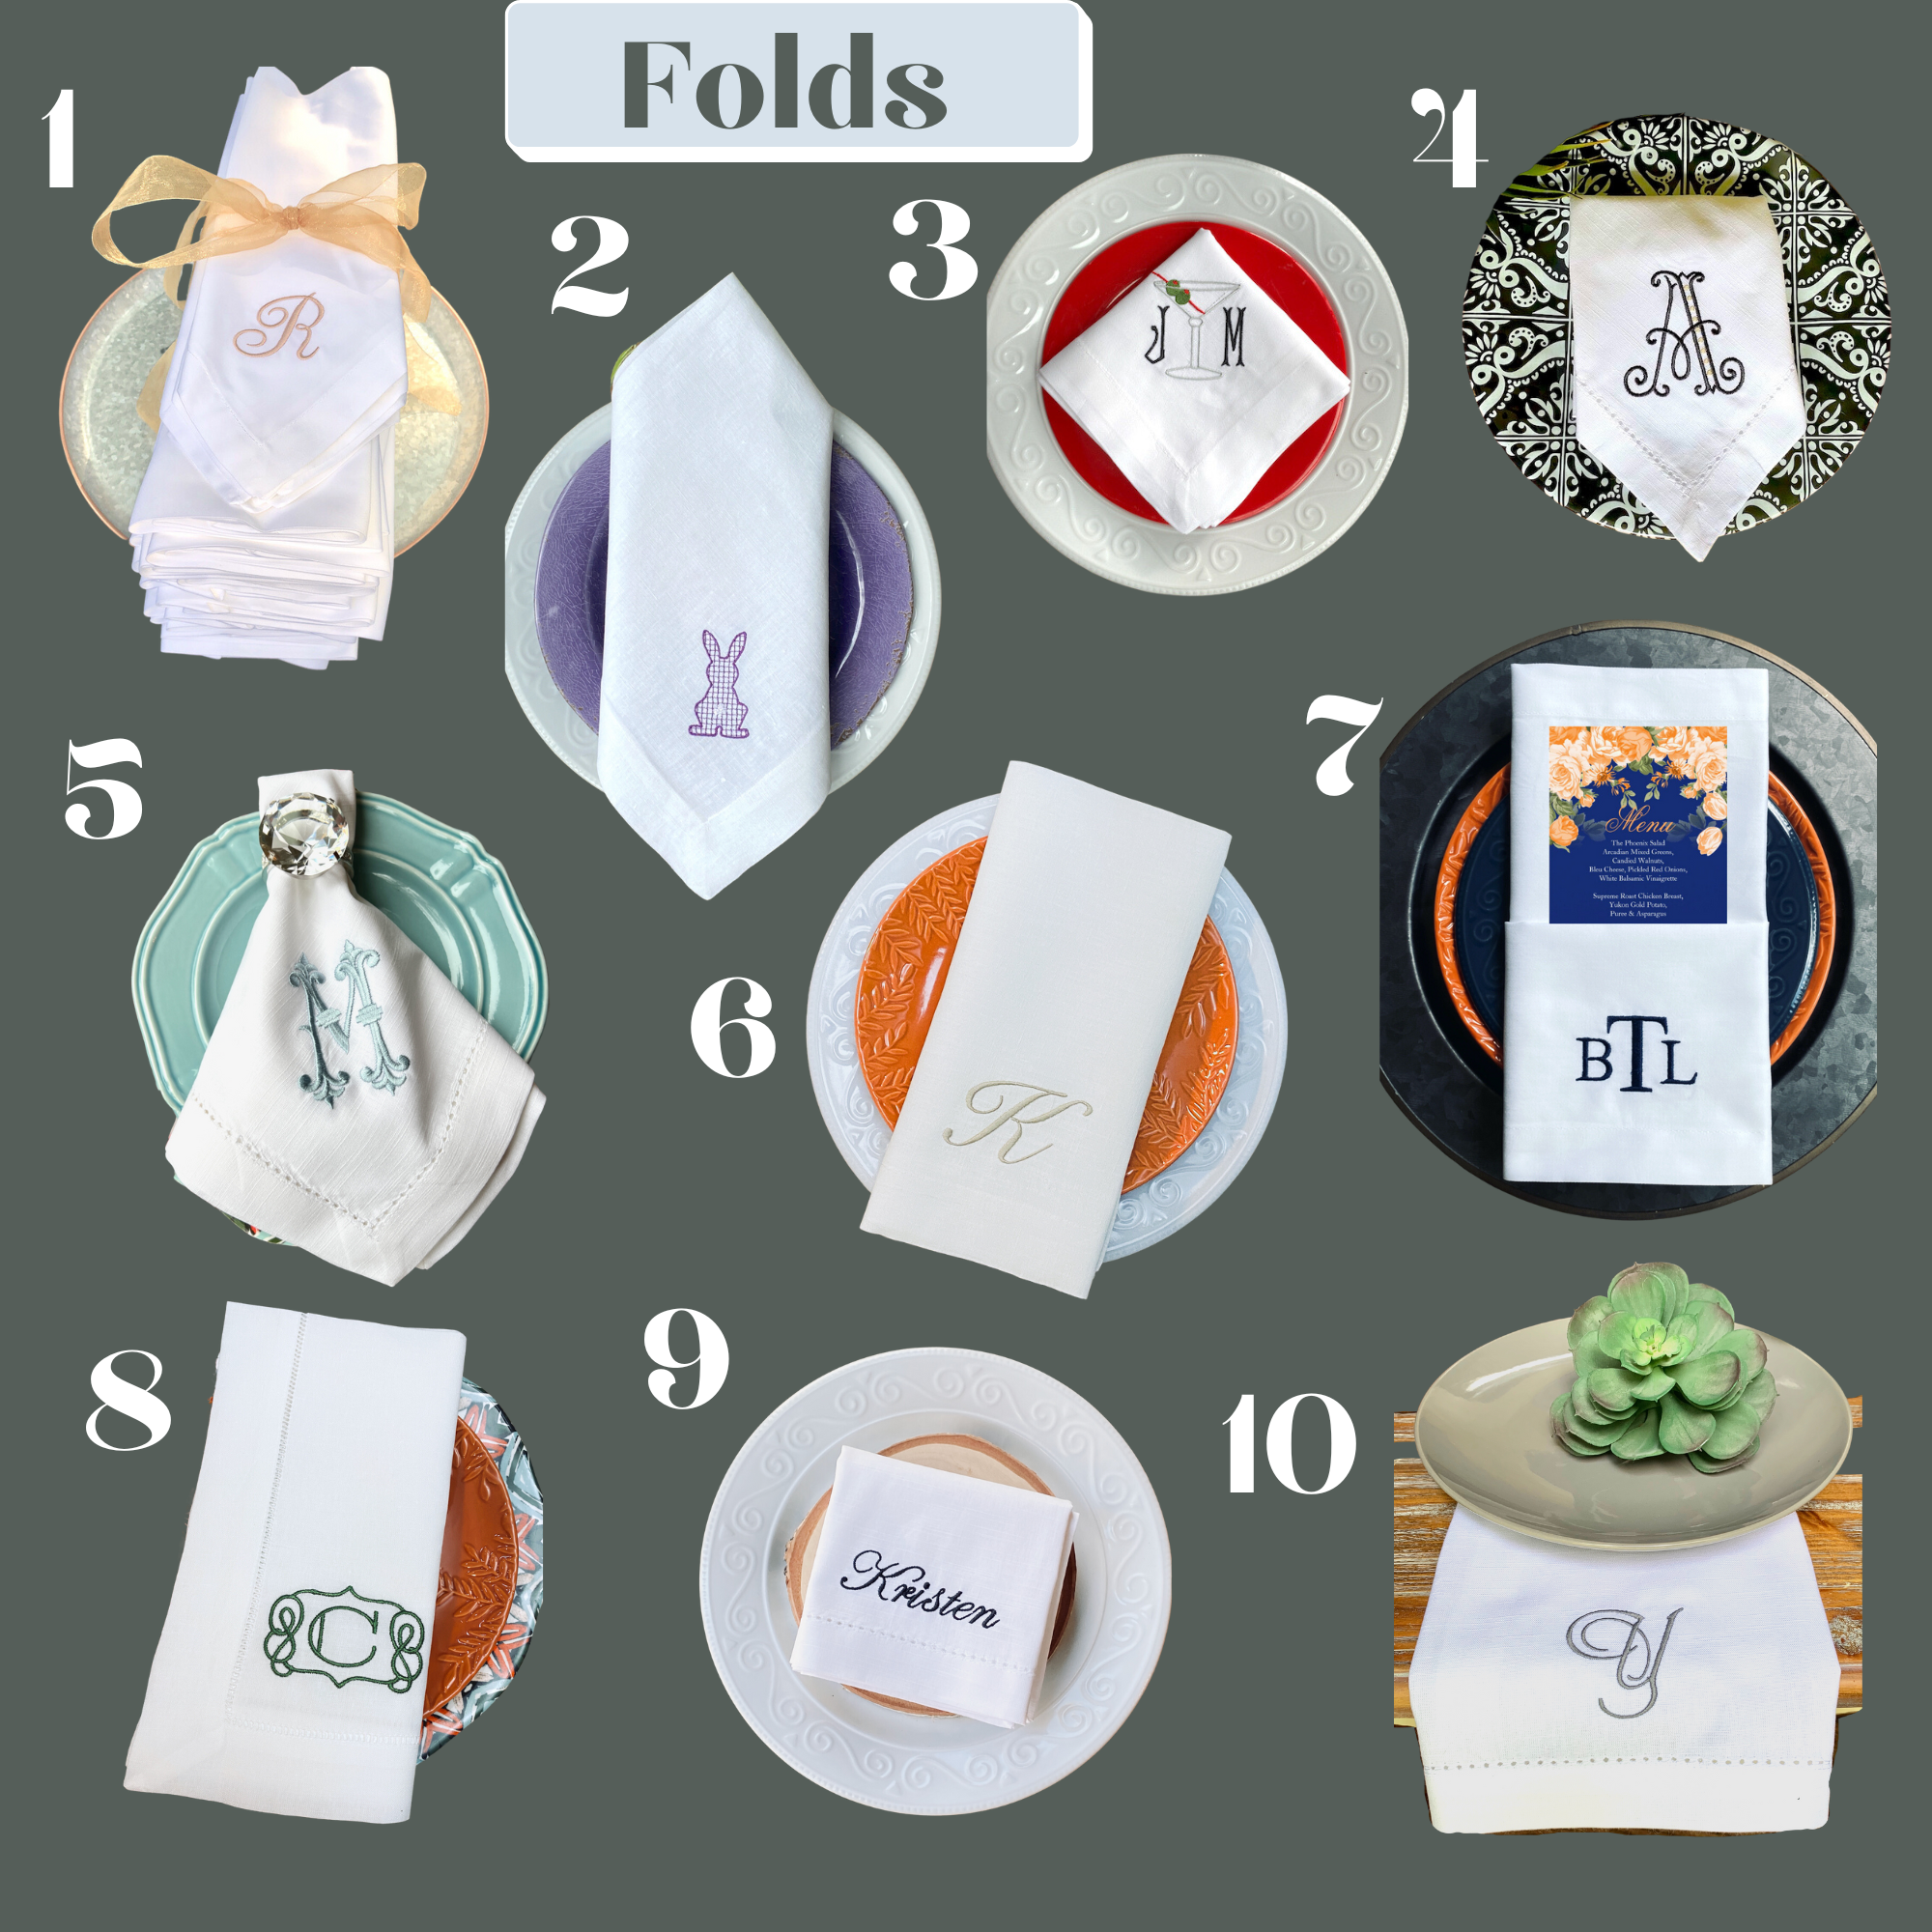 SPECIAL 27 in Linen Napkins SAME PRICE as 24 in Set of 12 while supply –  Embroidery by Linda Store